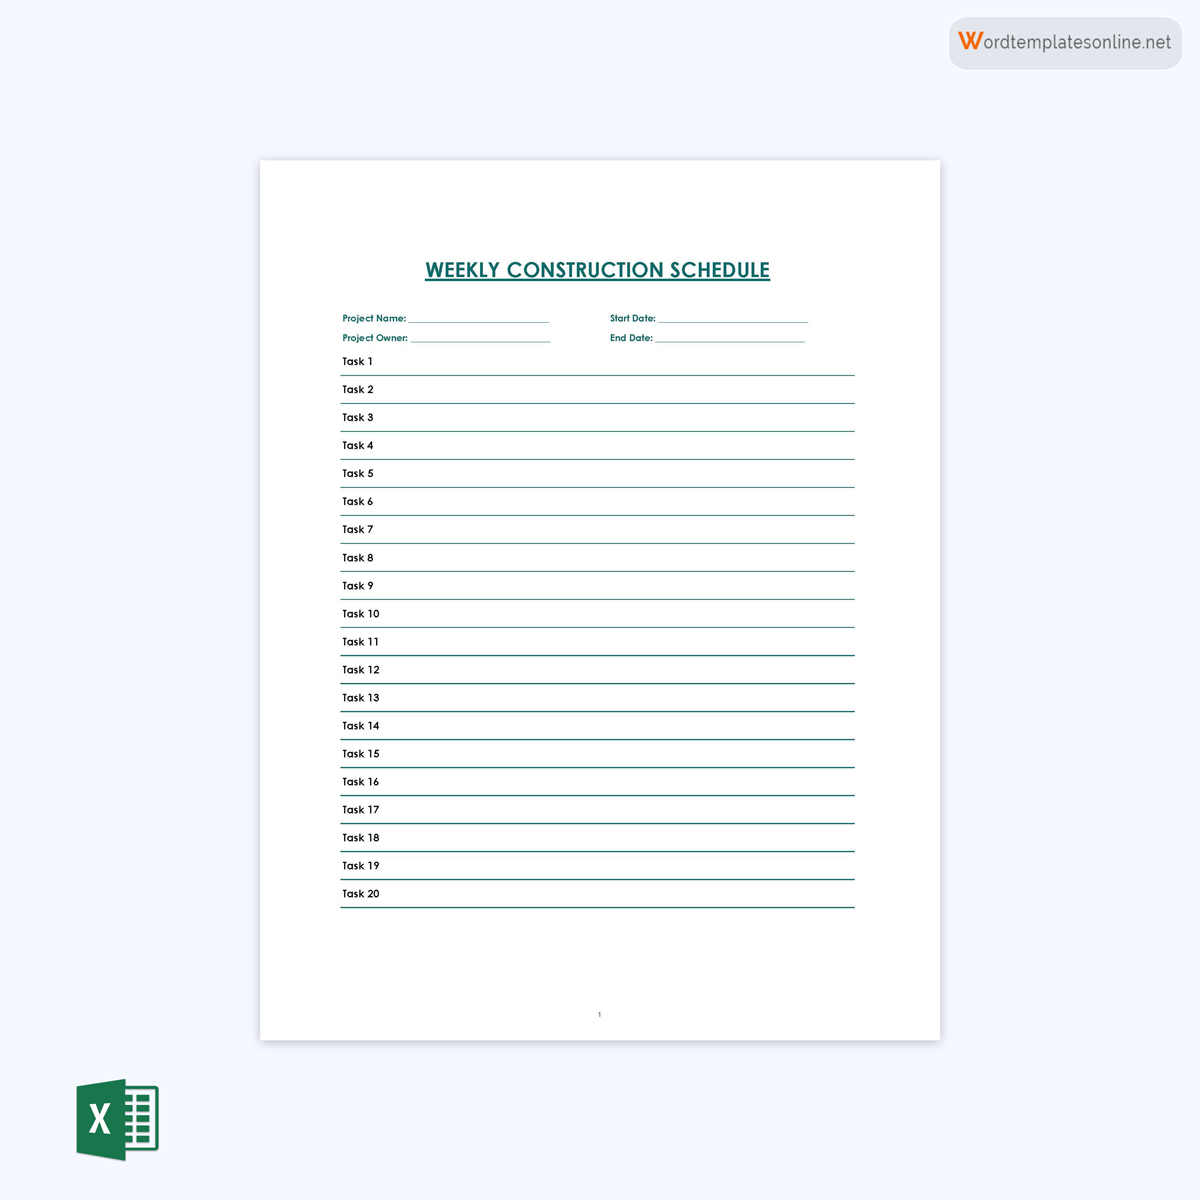 Free Editable Weekly Construction Schedule Template 01 in Excel Format